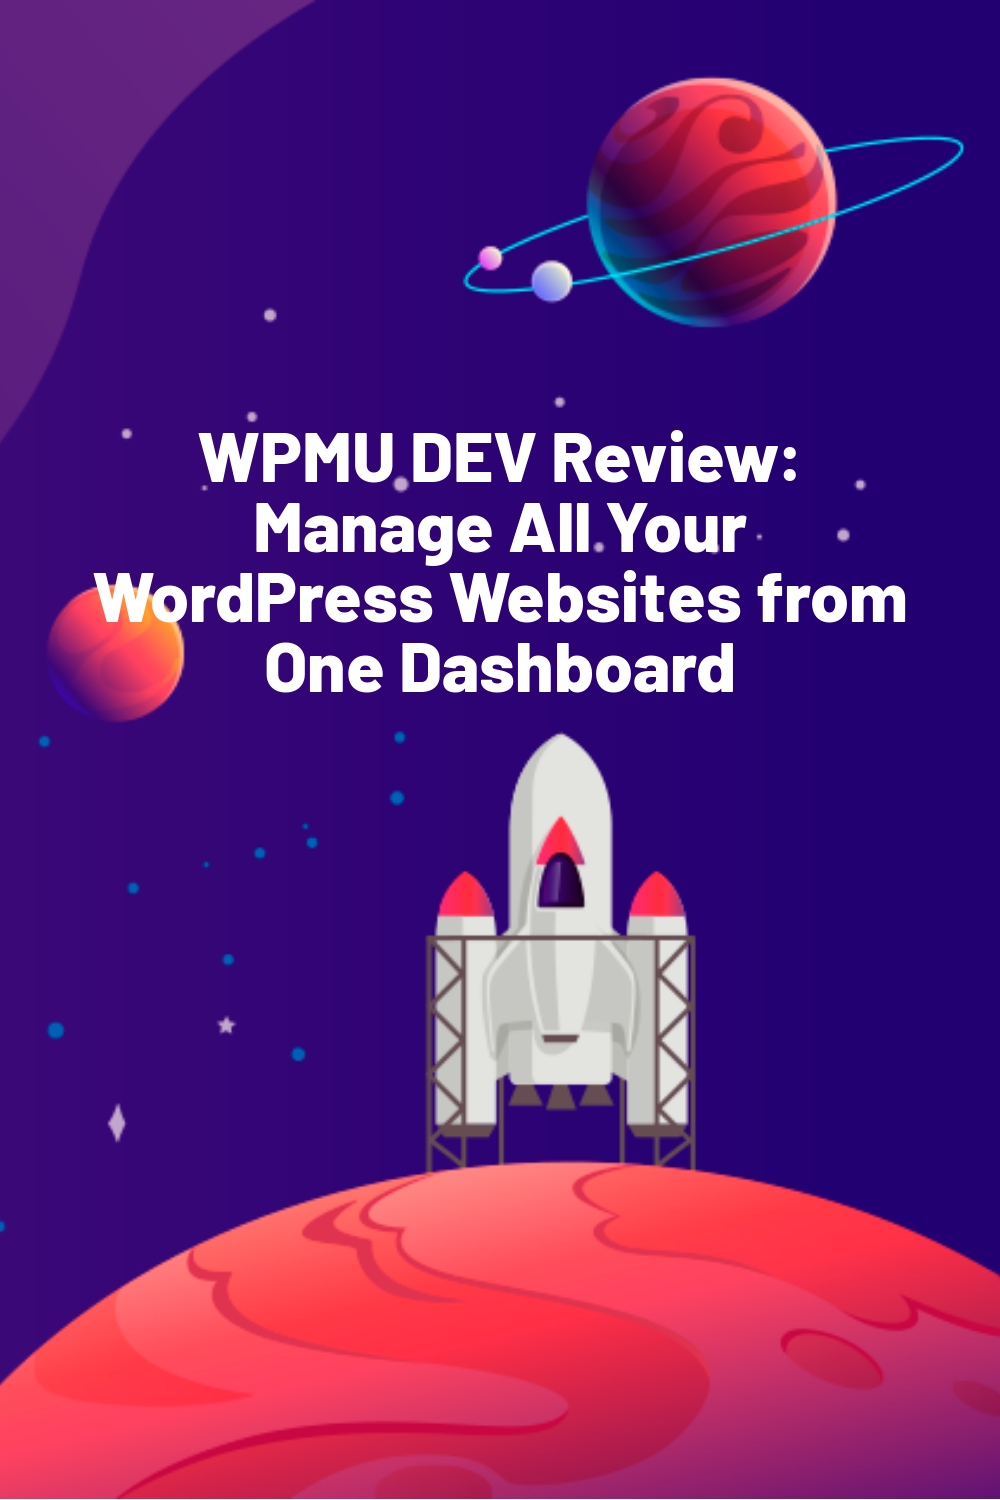 WPMU DEV Review: Manage All Your WordPress Websites from One Dashboard